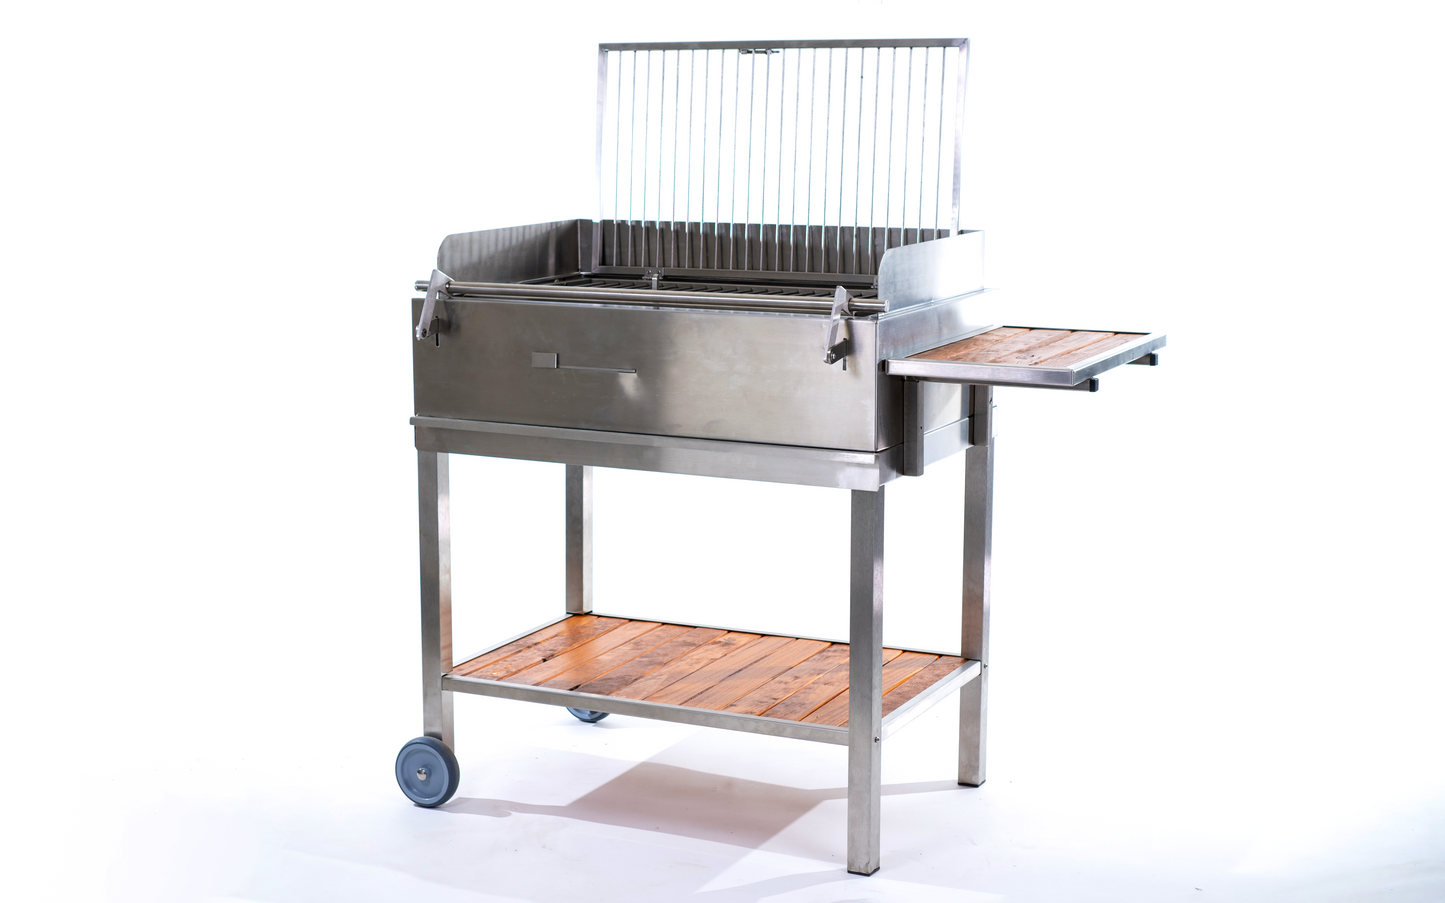 The Flip Grill